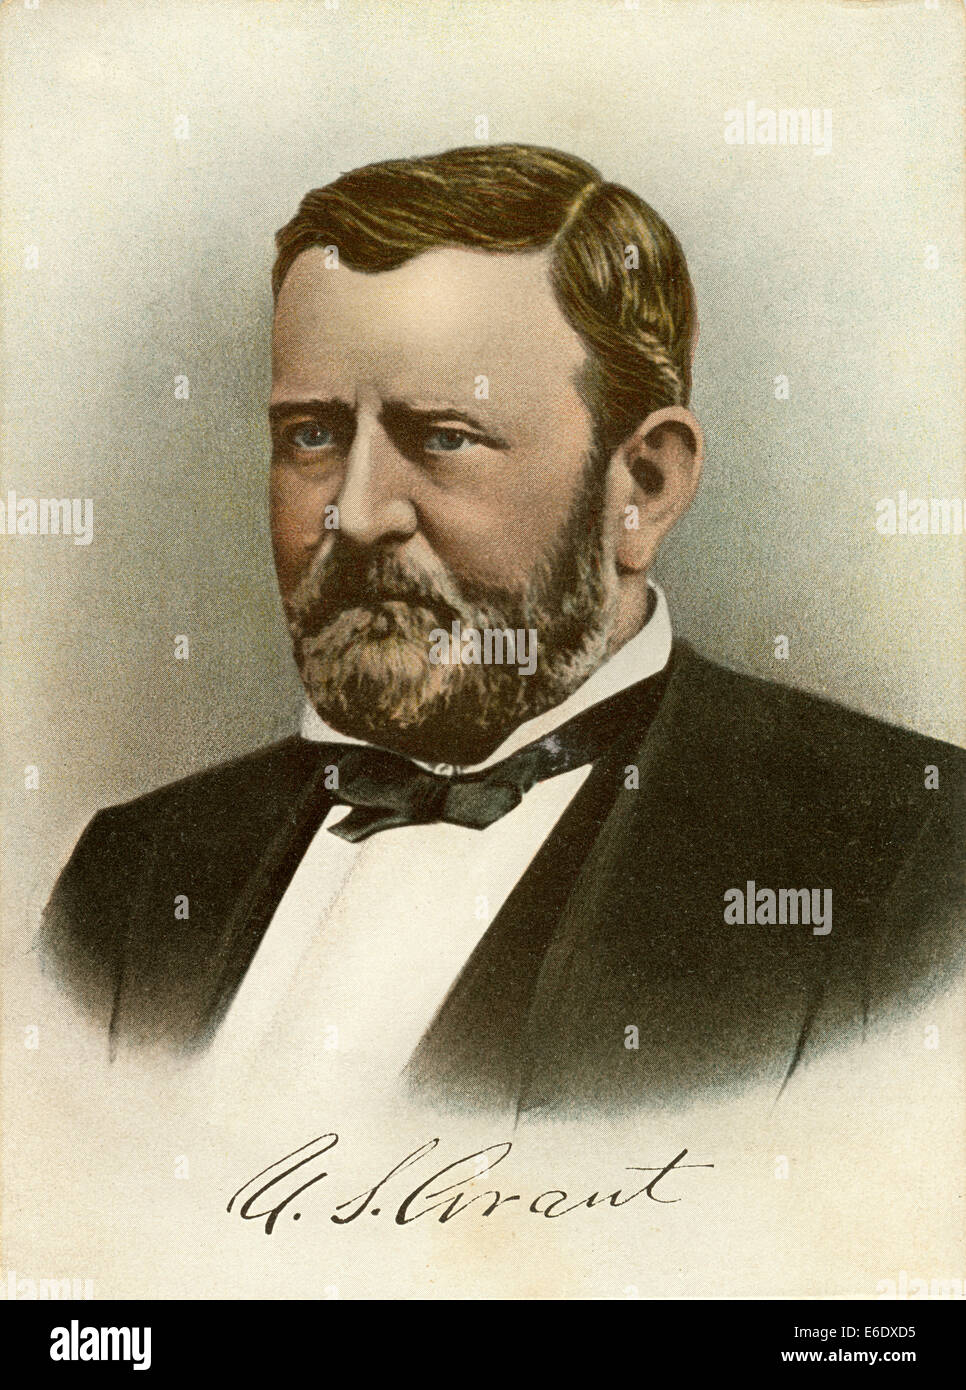 Ulysses S. Grant, 18th President of the United States, Portrait Stock Photo